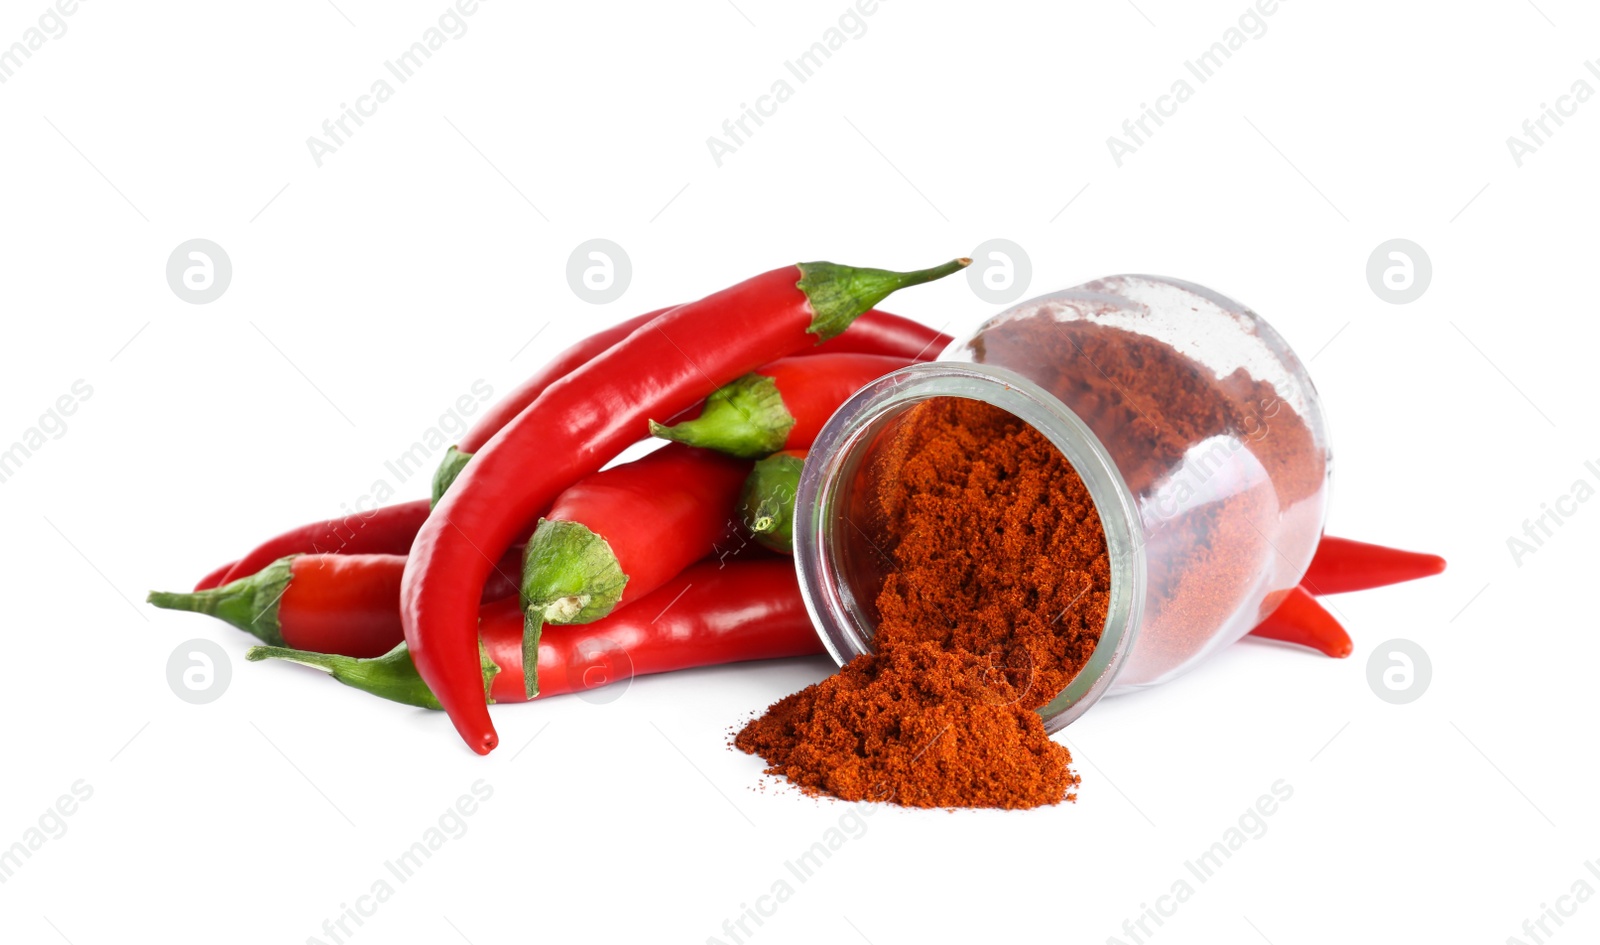 Photo of Fresh chili peppers and jar of paprika powder on white background